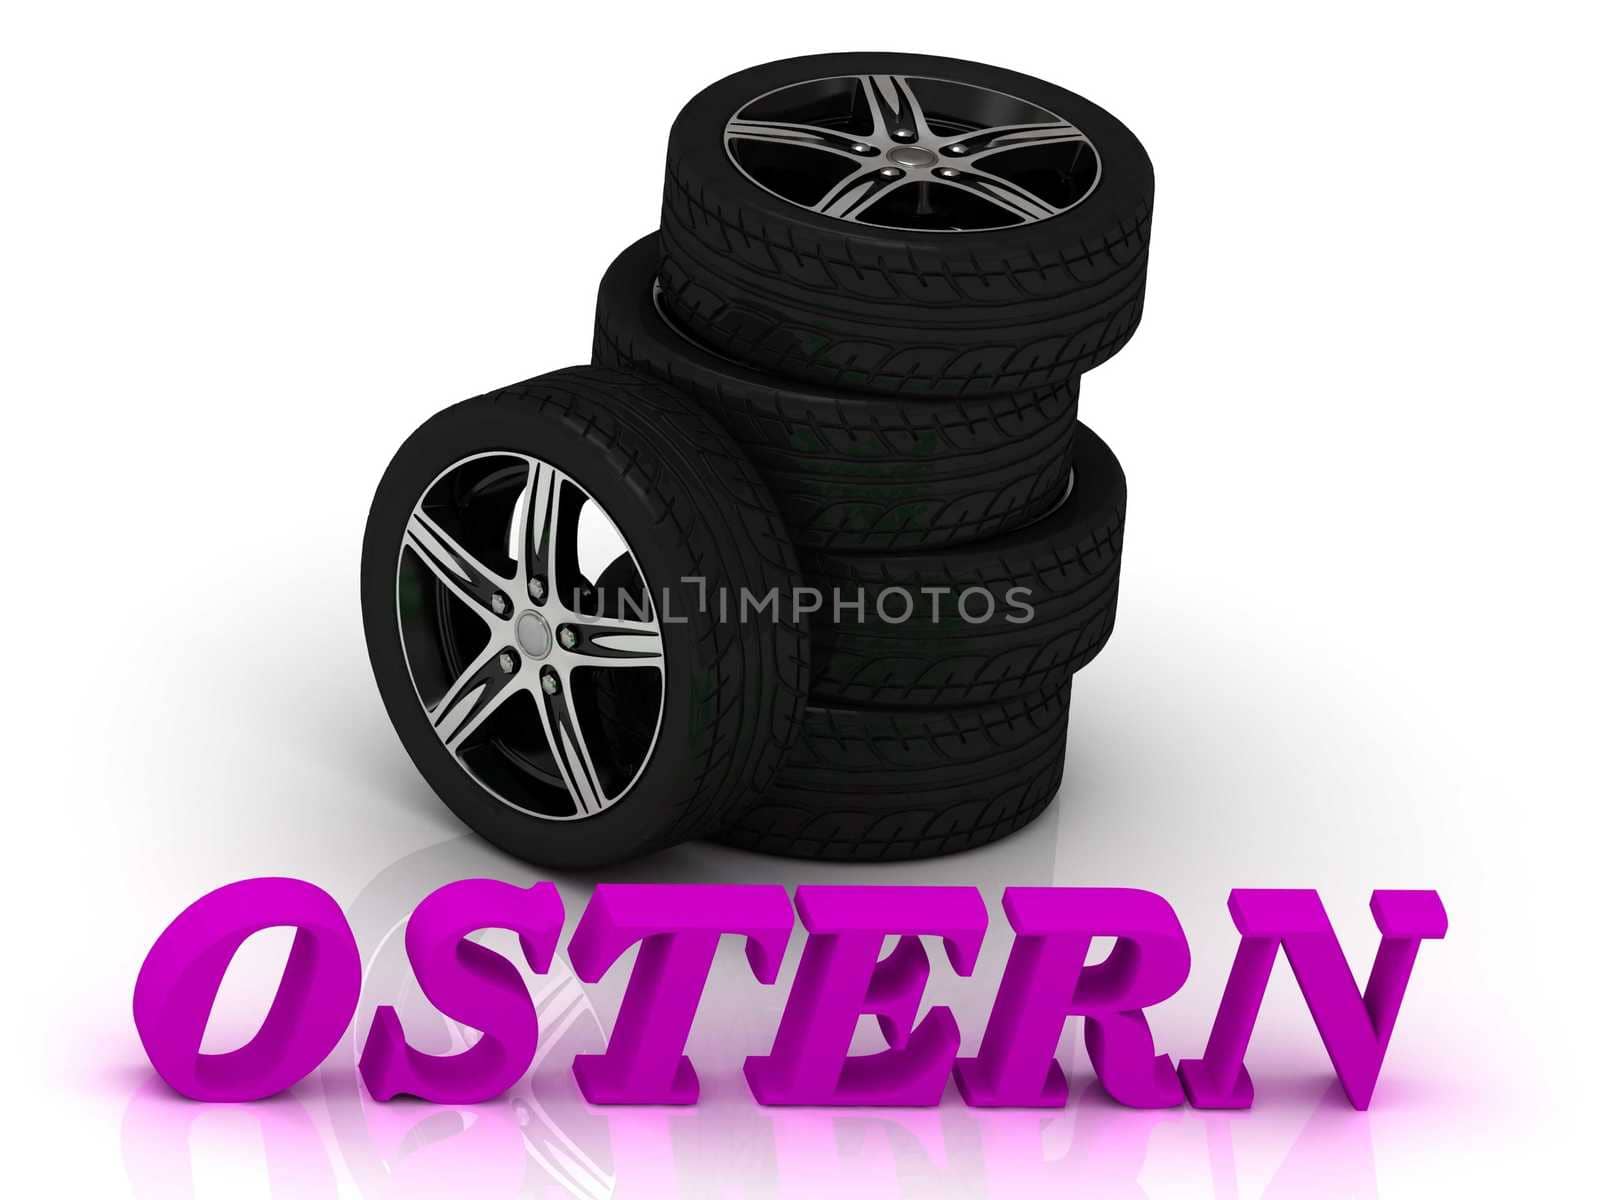 OSTERN- bright letters and rims mashine black wheels by GreenMost